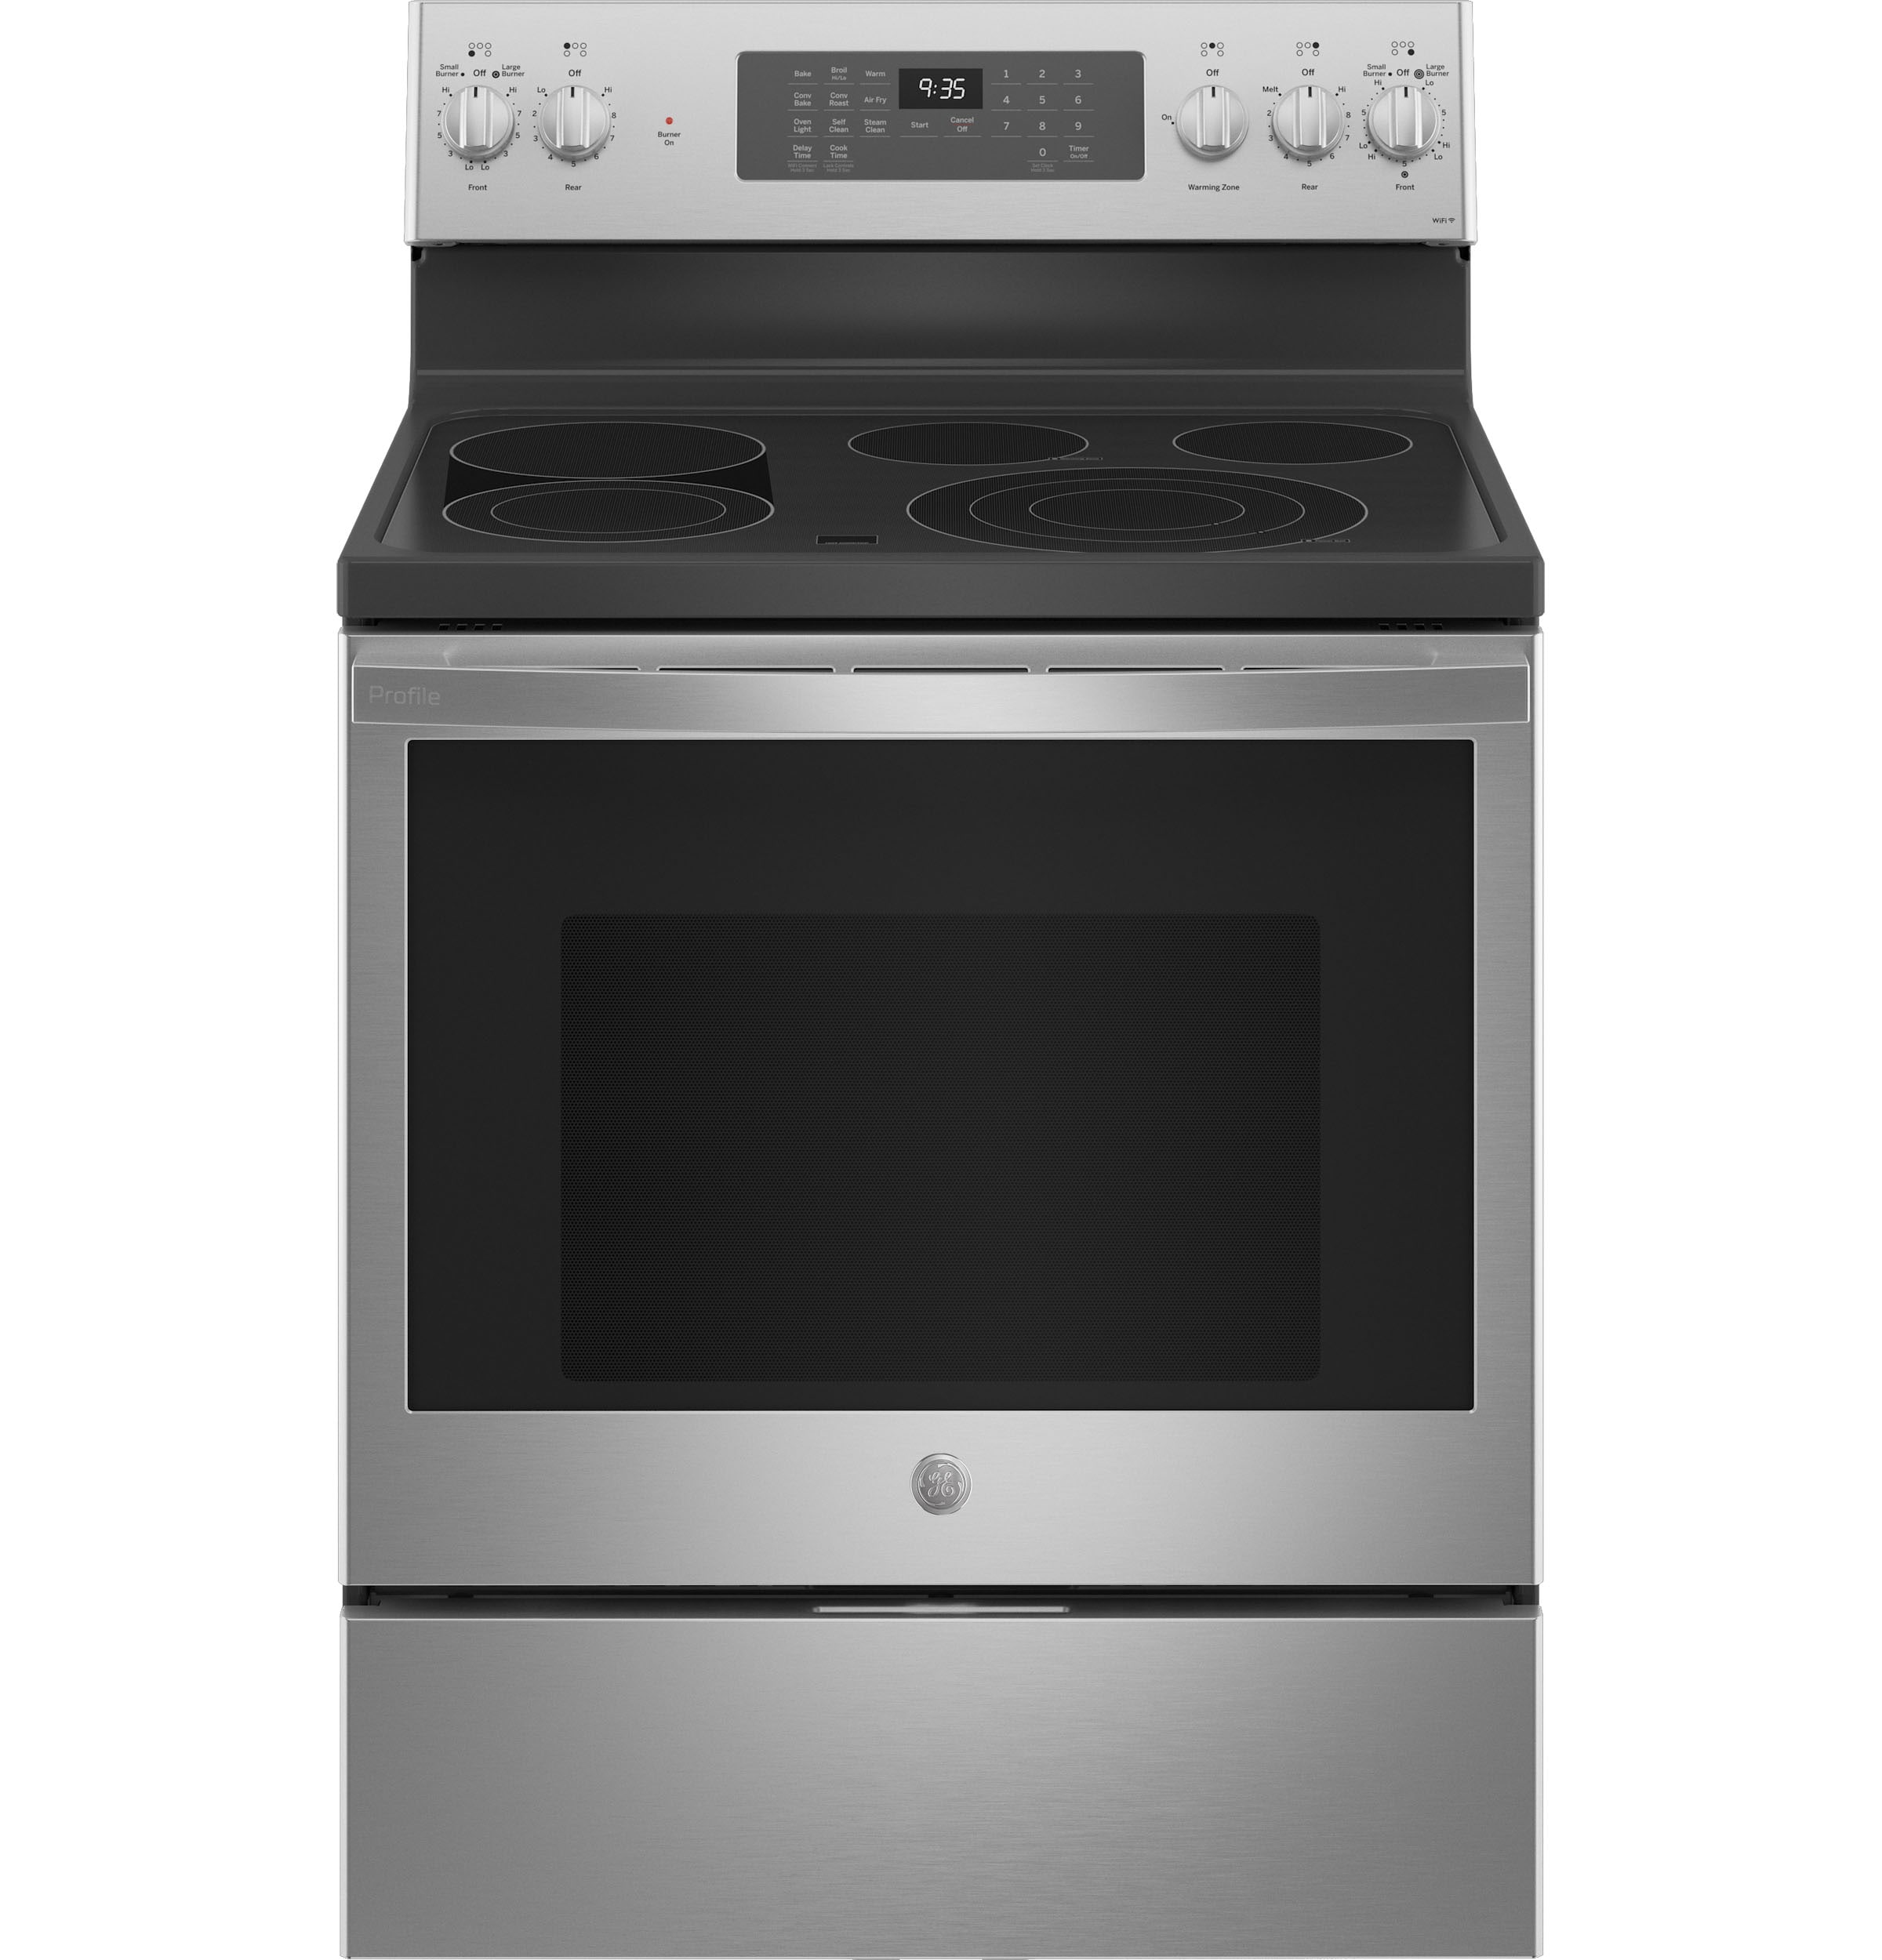 GE PB935YPFS Profile 30 Fingerprint Resistant Stainless Steel Electric Range with Air Fry - Convection